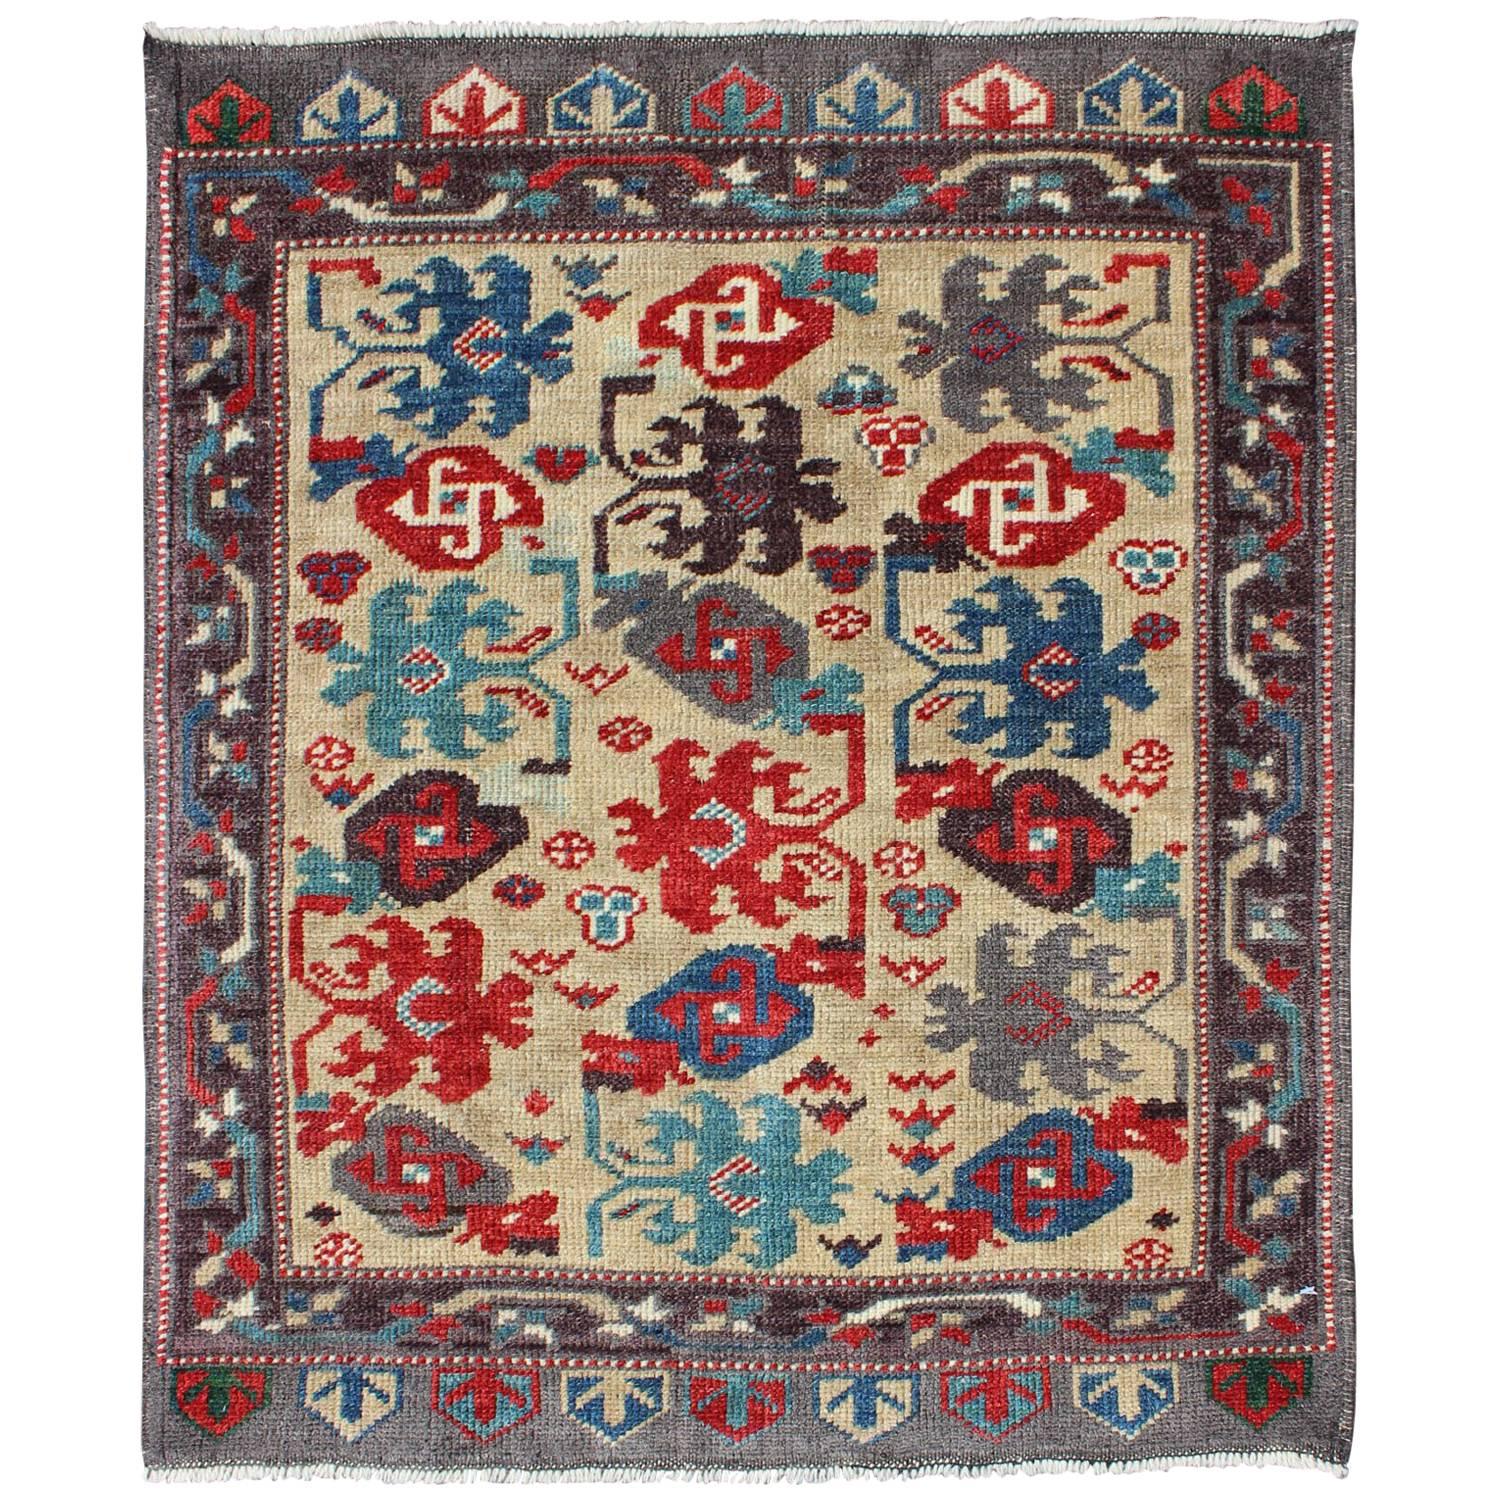 Midcentury Vintage Turkish Oushak Rug with All-Over Tribal Pattern in Cream